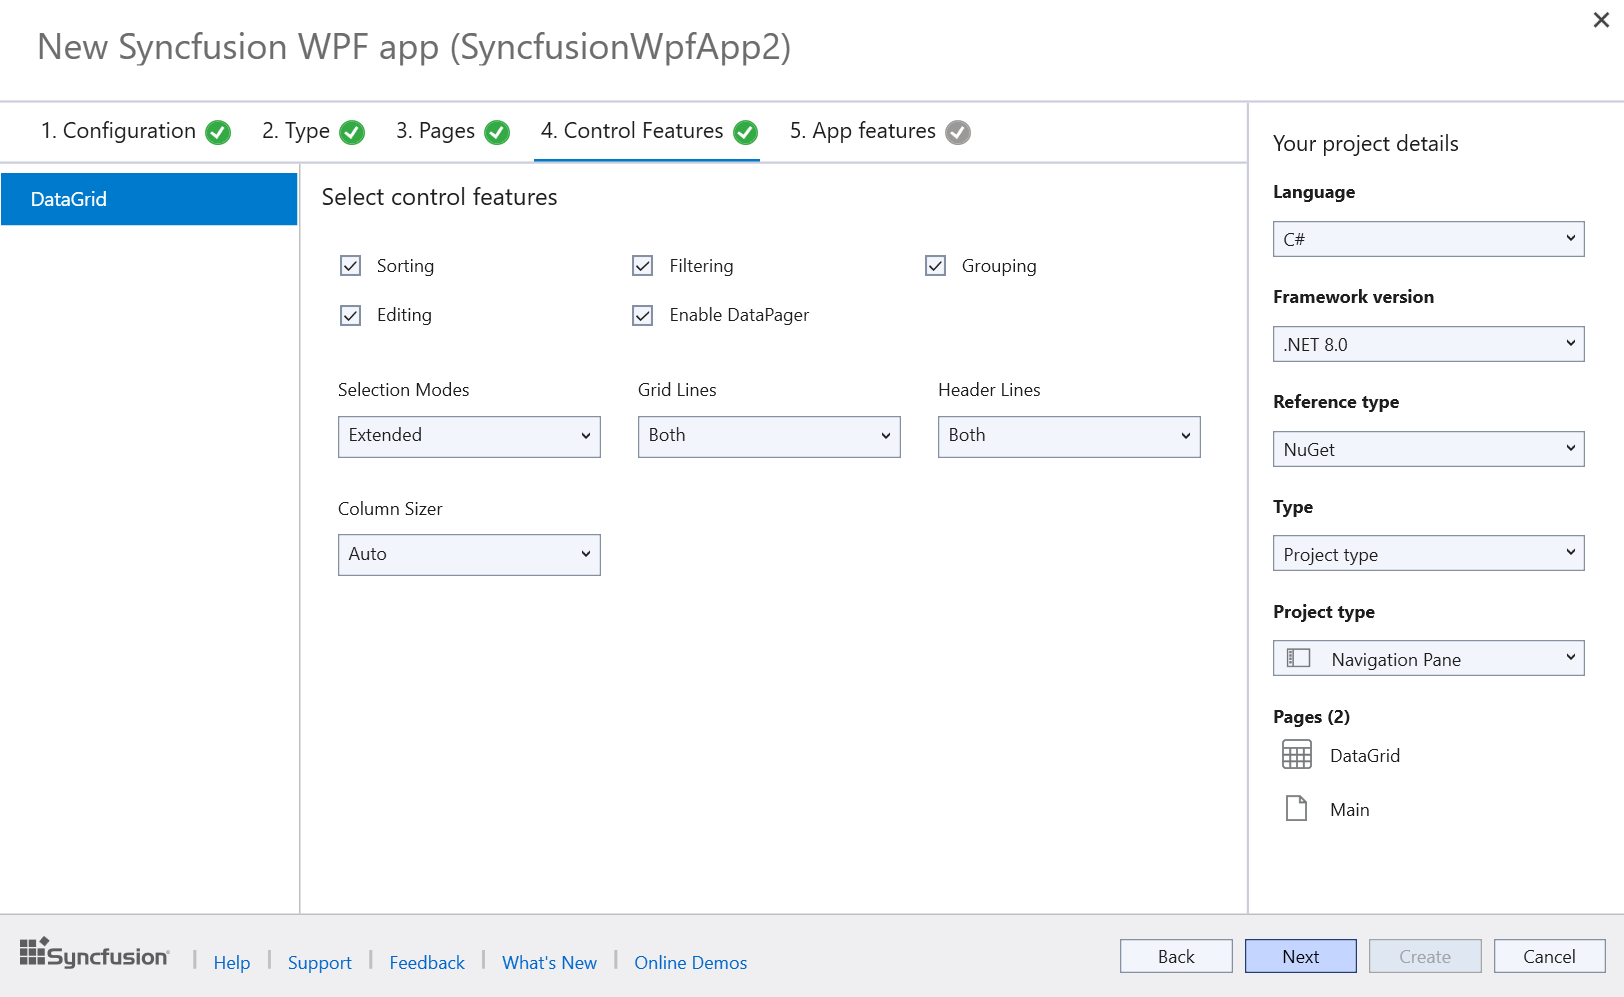 Syncfusion WinForms control features selection wizard